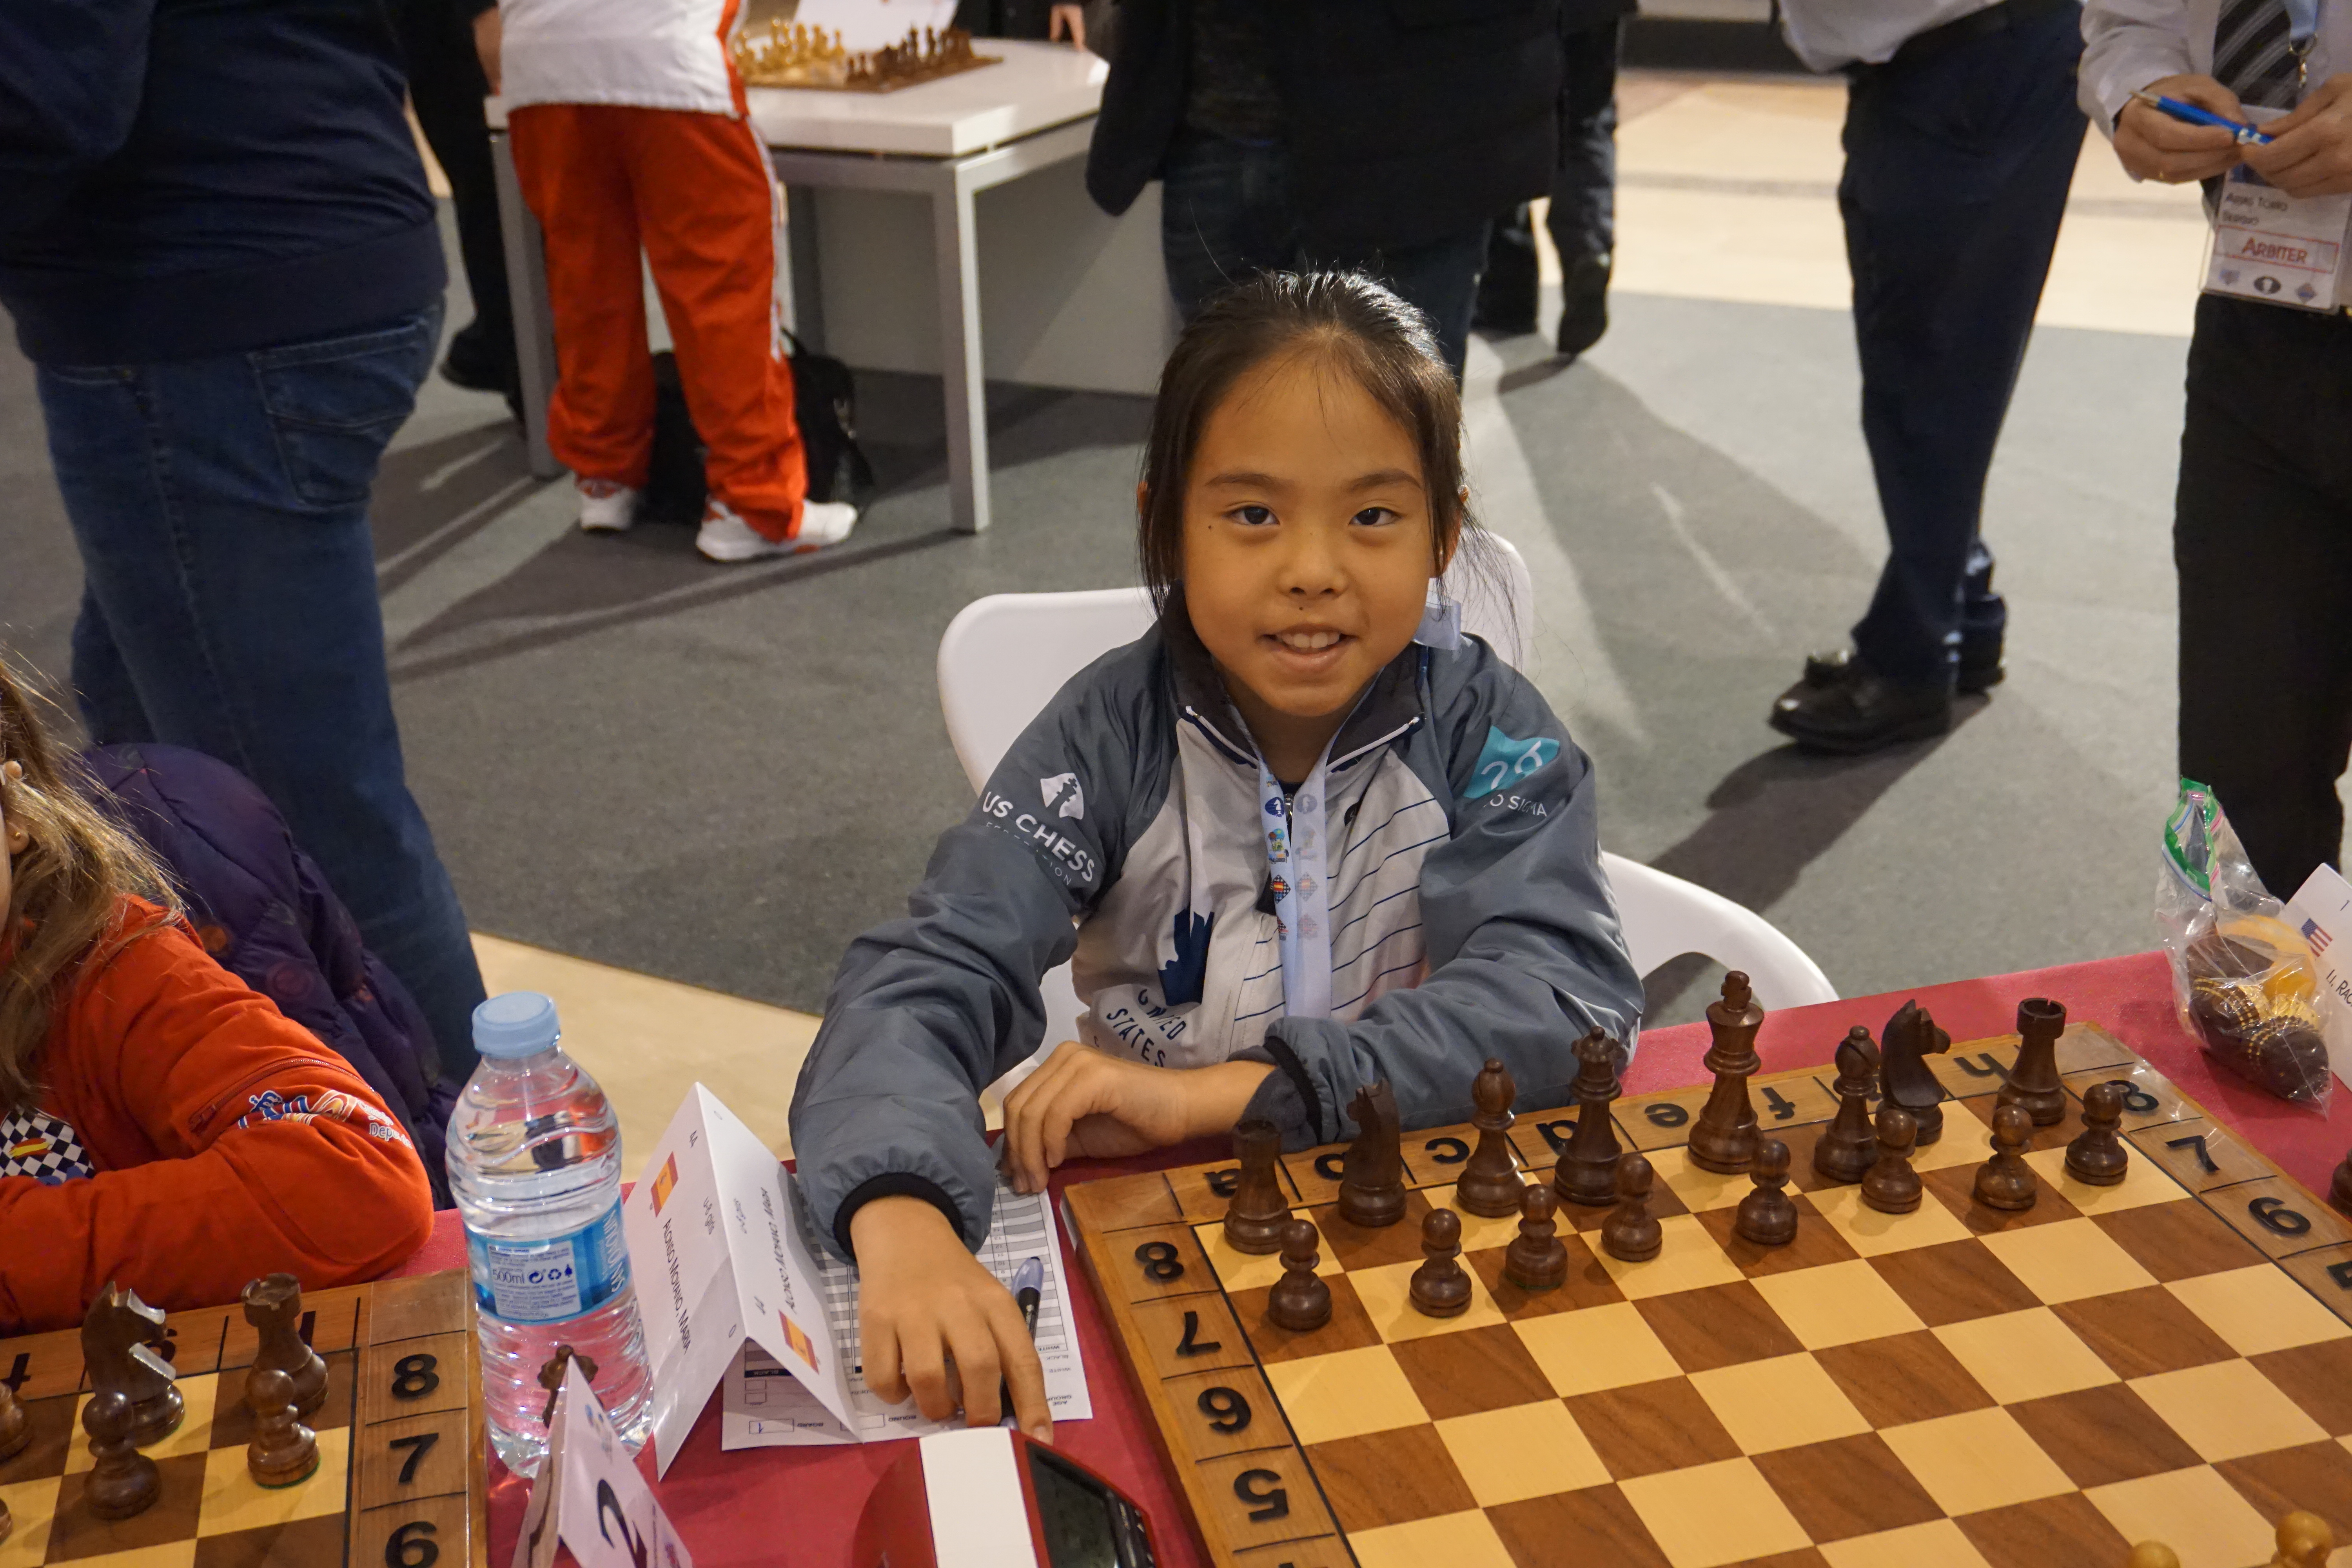 US Chess on X: While @FabianoCaruana is fighting the overall world  championship, 8-year-old Yuvraj Chennareddy from IL has a 7/7 perfect score  at the World U-8 Championship in Spain. He is on